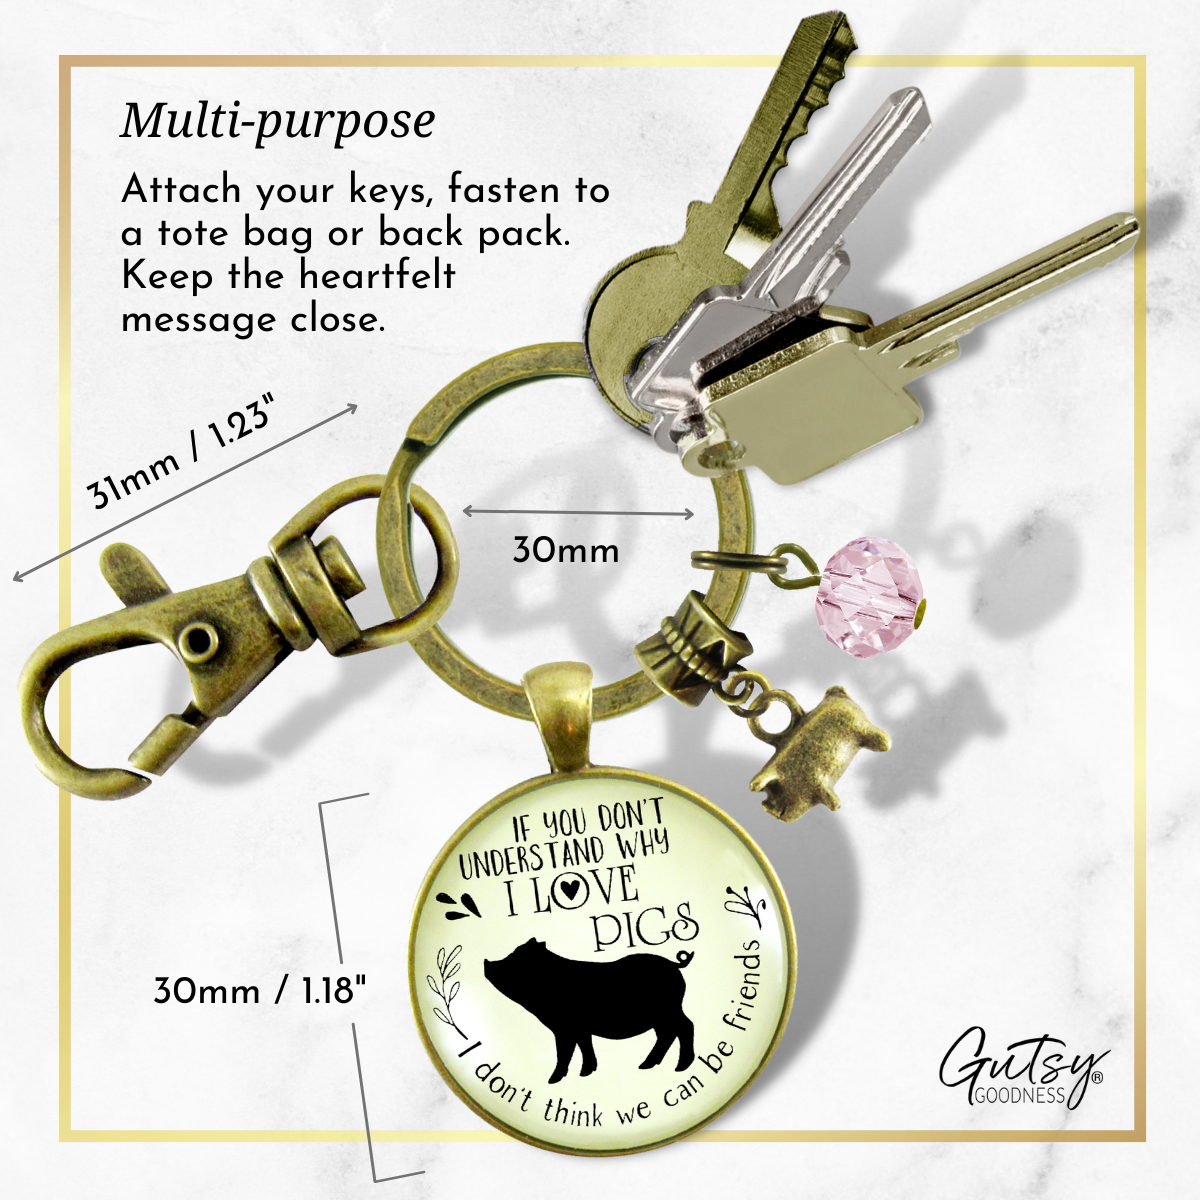 Pig Friendship Keychain Country Girl Pig Lovers Inspired Jewelry - Gutsy Goodness Handmade Jewelry;Pig Friendship Keychain Country Girl Pig Lovers Inspired Jewelry - Gutsy Goodness Handmade Jewelry Gifts